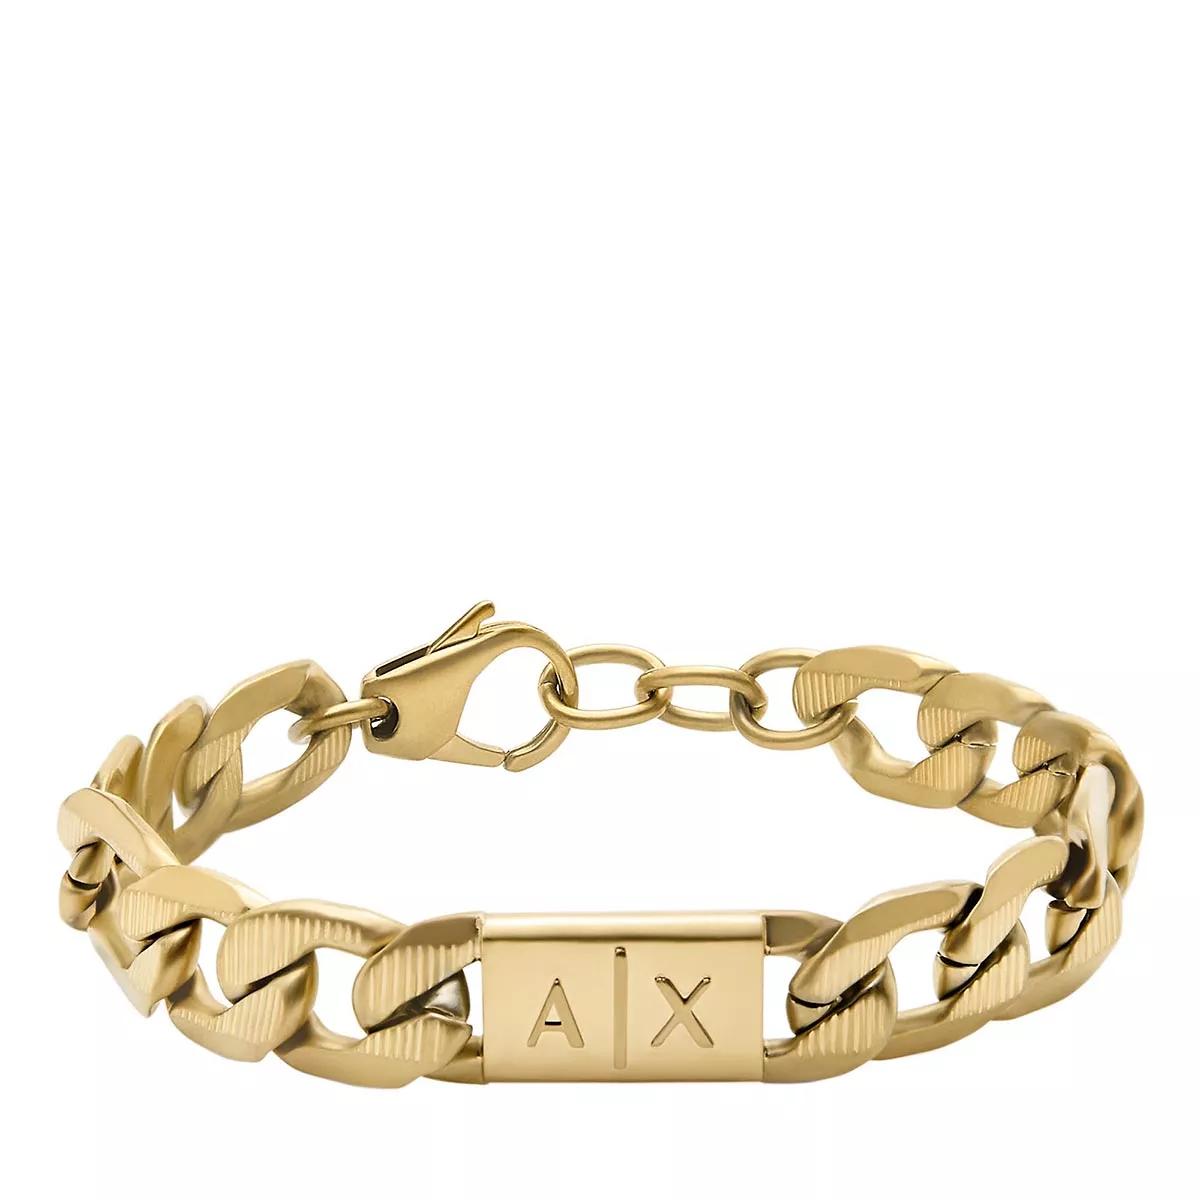 Armani Exchange Stainless Steel Gold Armband Bracelet | Chain